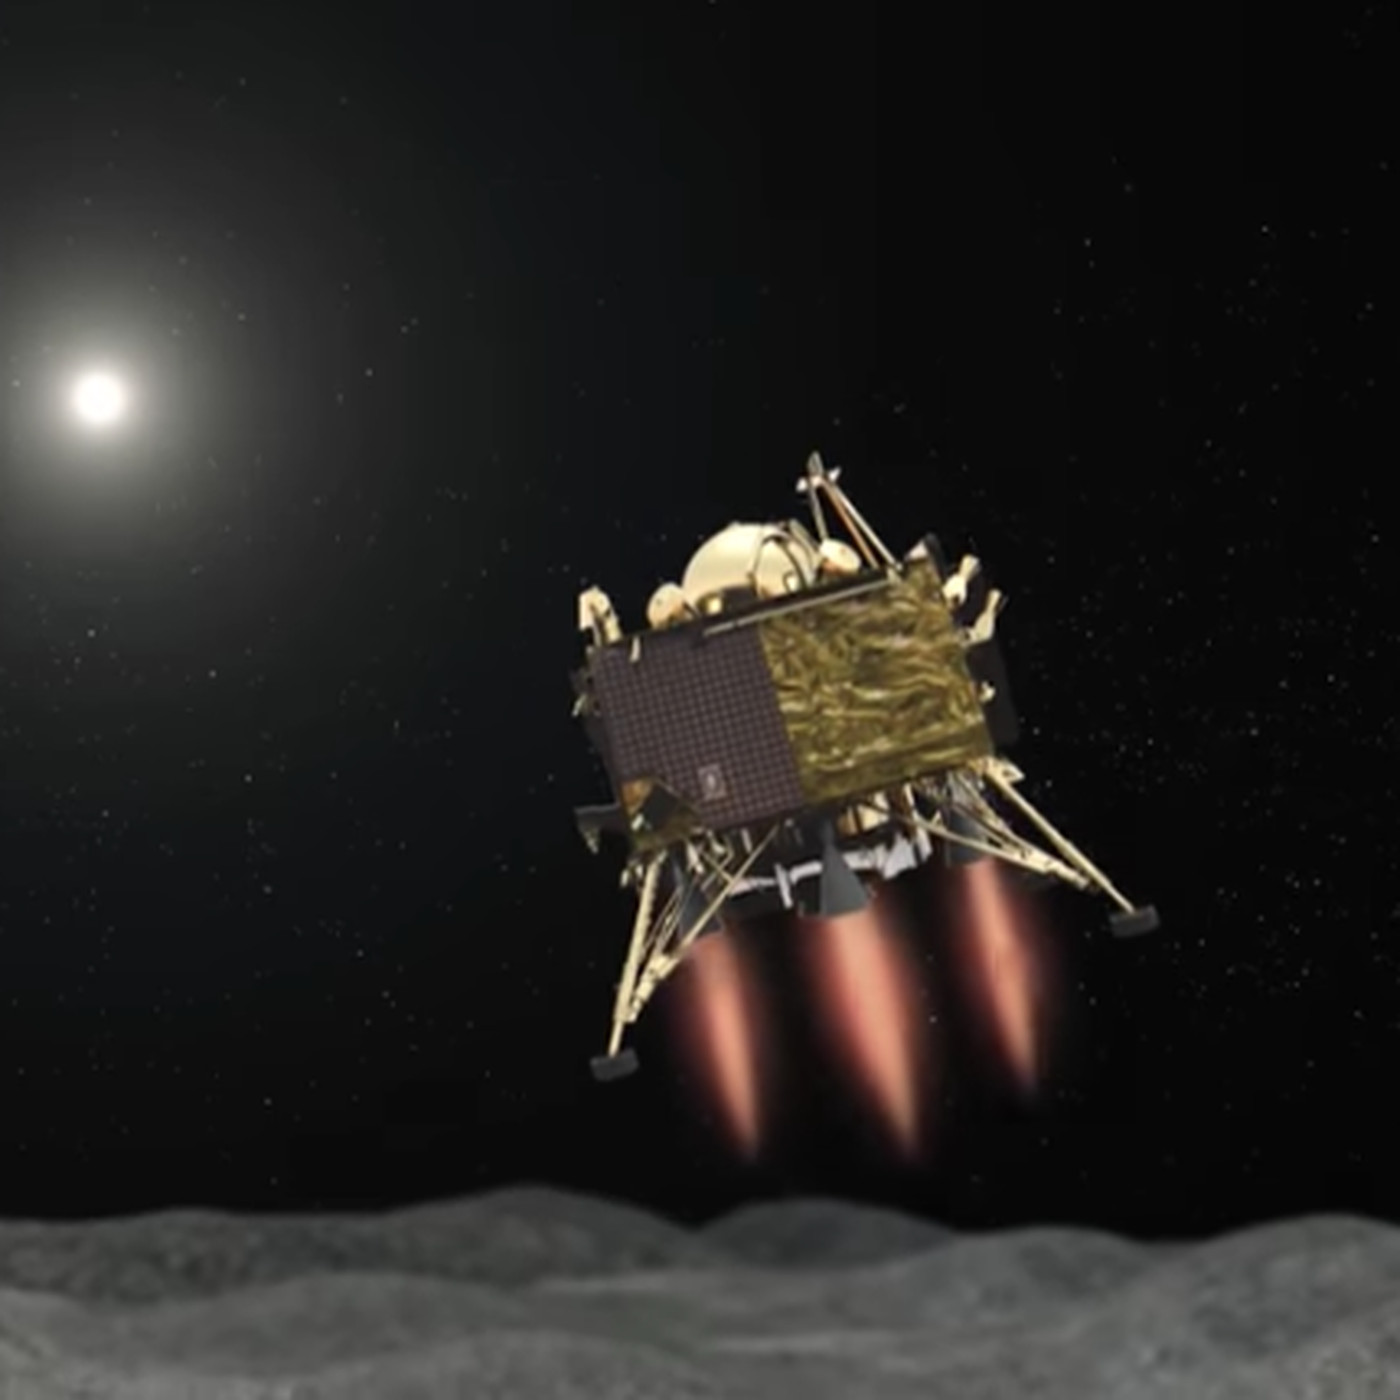 India says it has found its Moon lander, but it still cannot communicate with it - The Verge